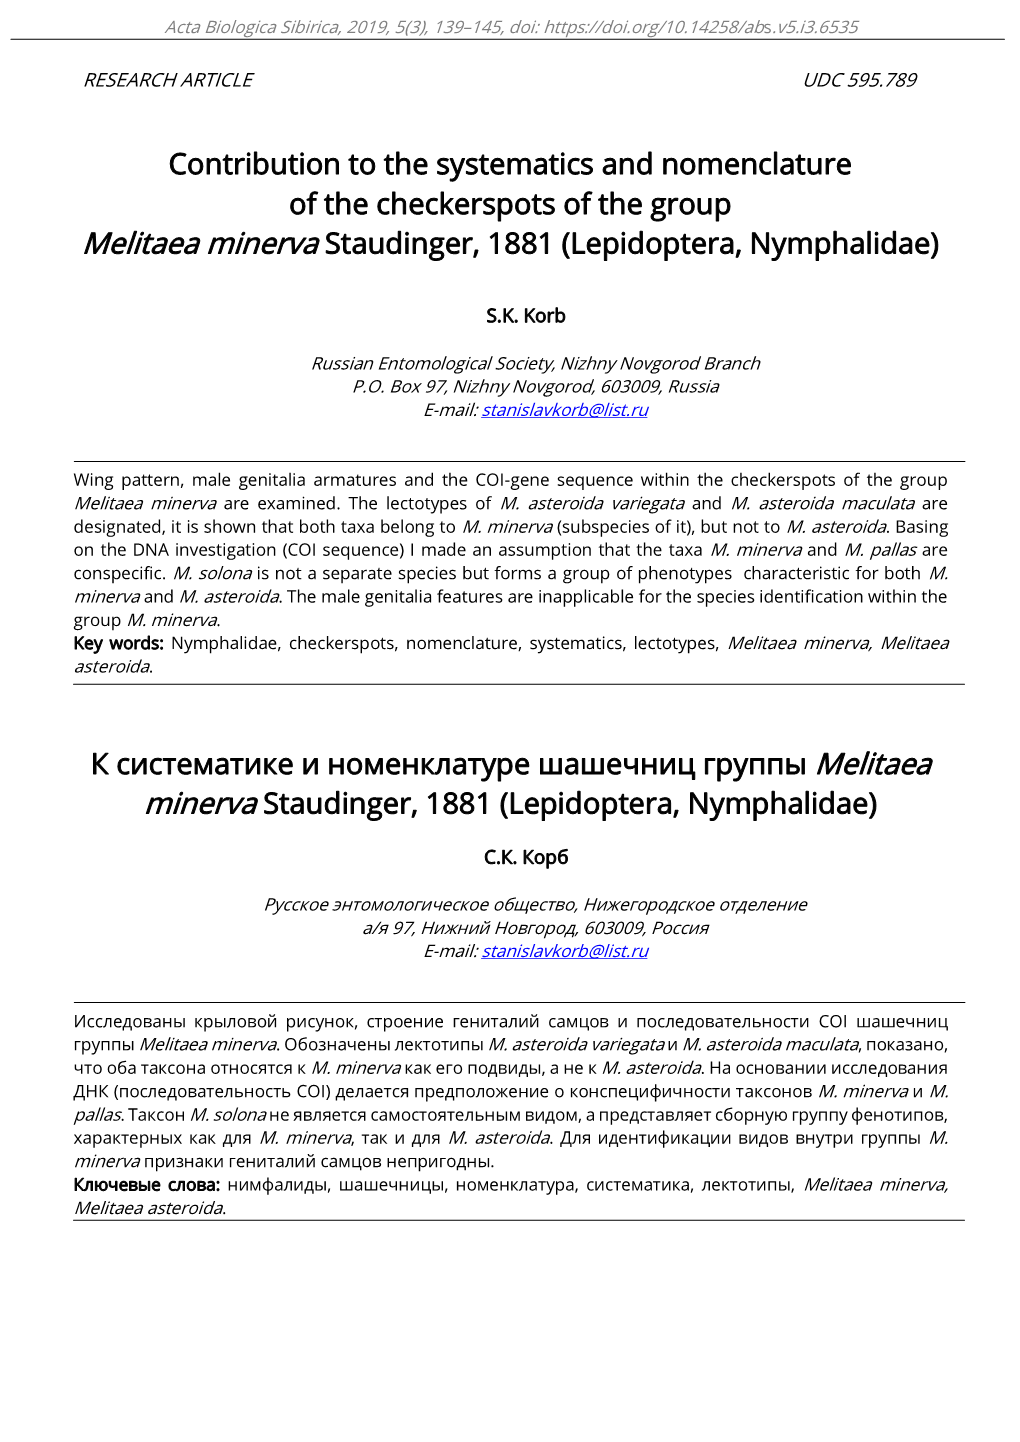 Contribution to the Systematics and Nomenclature of the Checkerspots of the Group Melitaea Minerva Staudinger, 1881 (Lepidoptera, Nymphalidae)